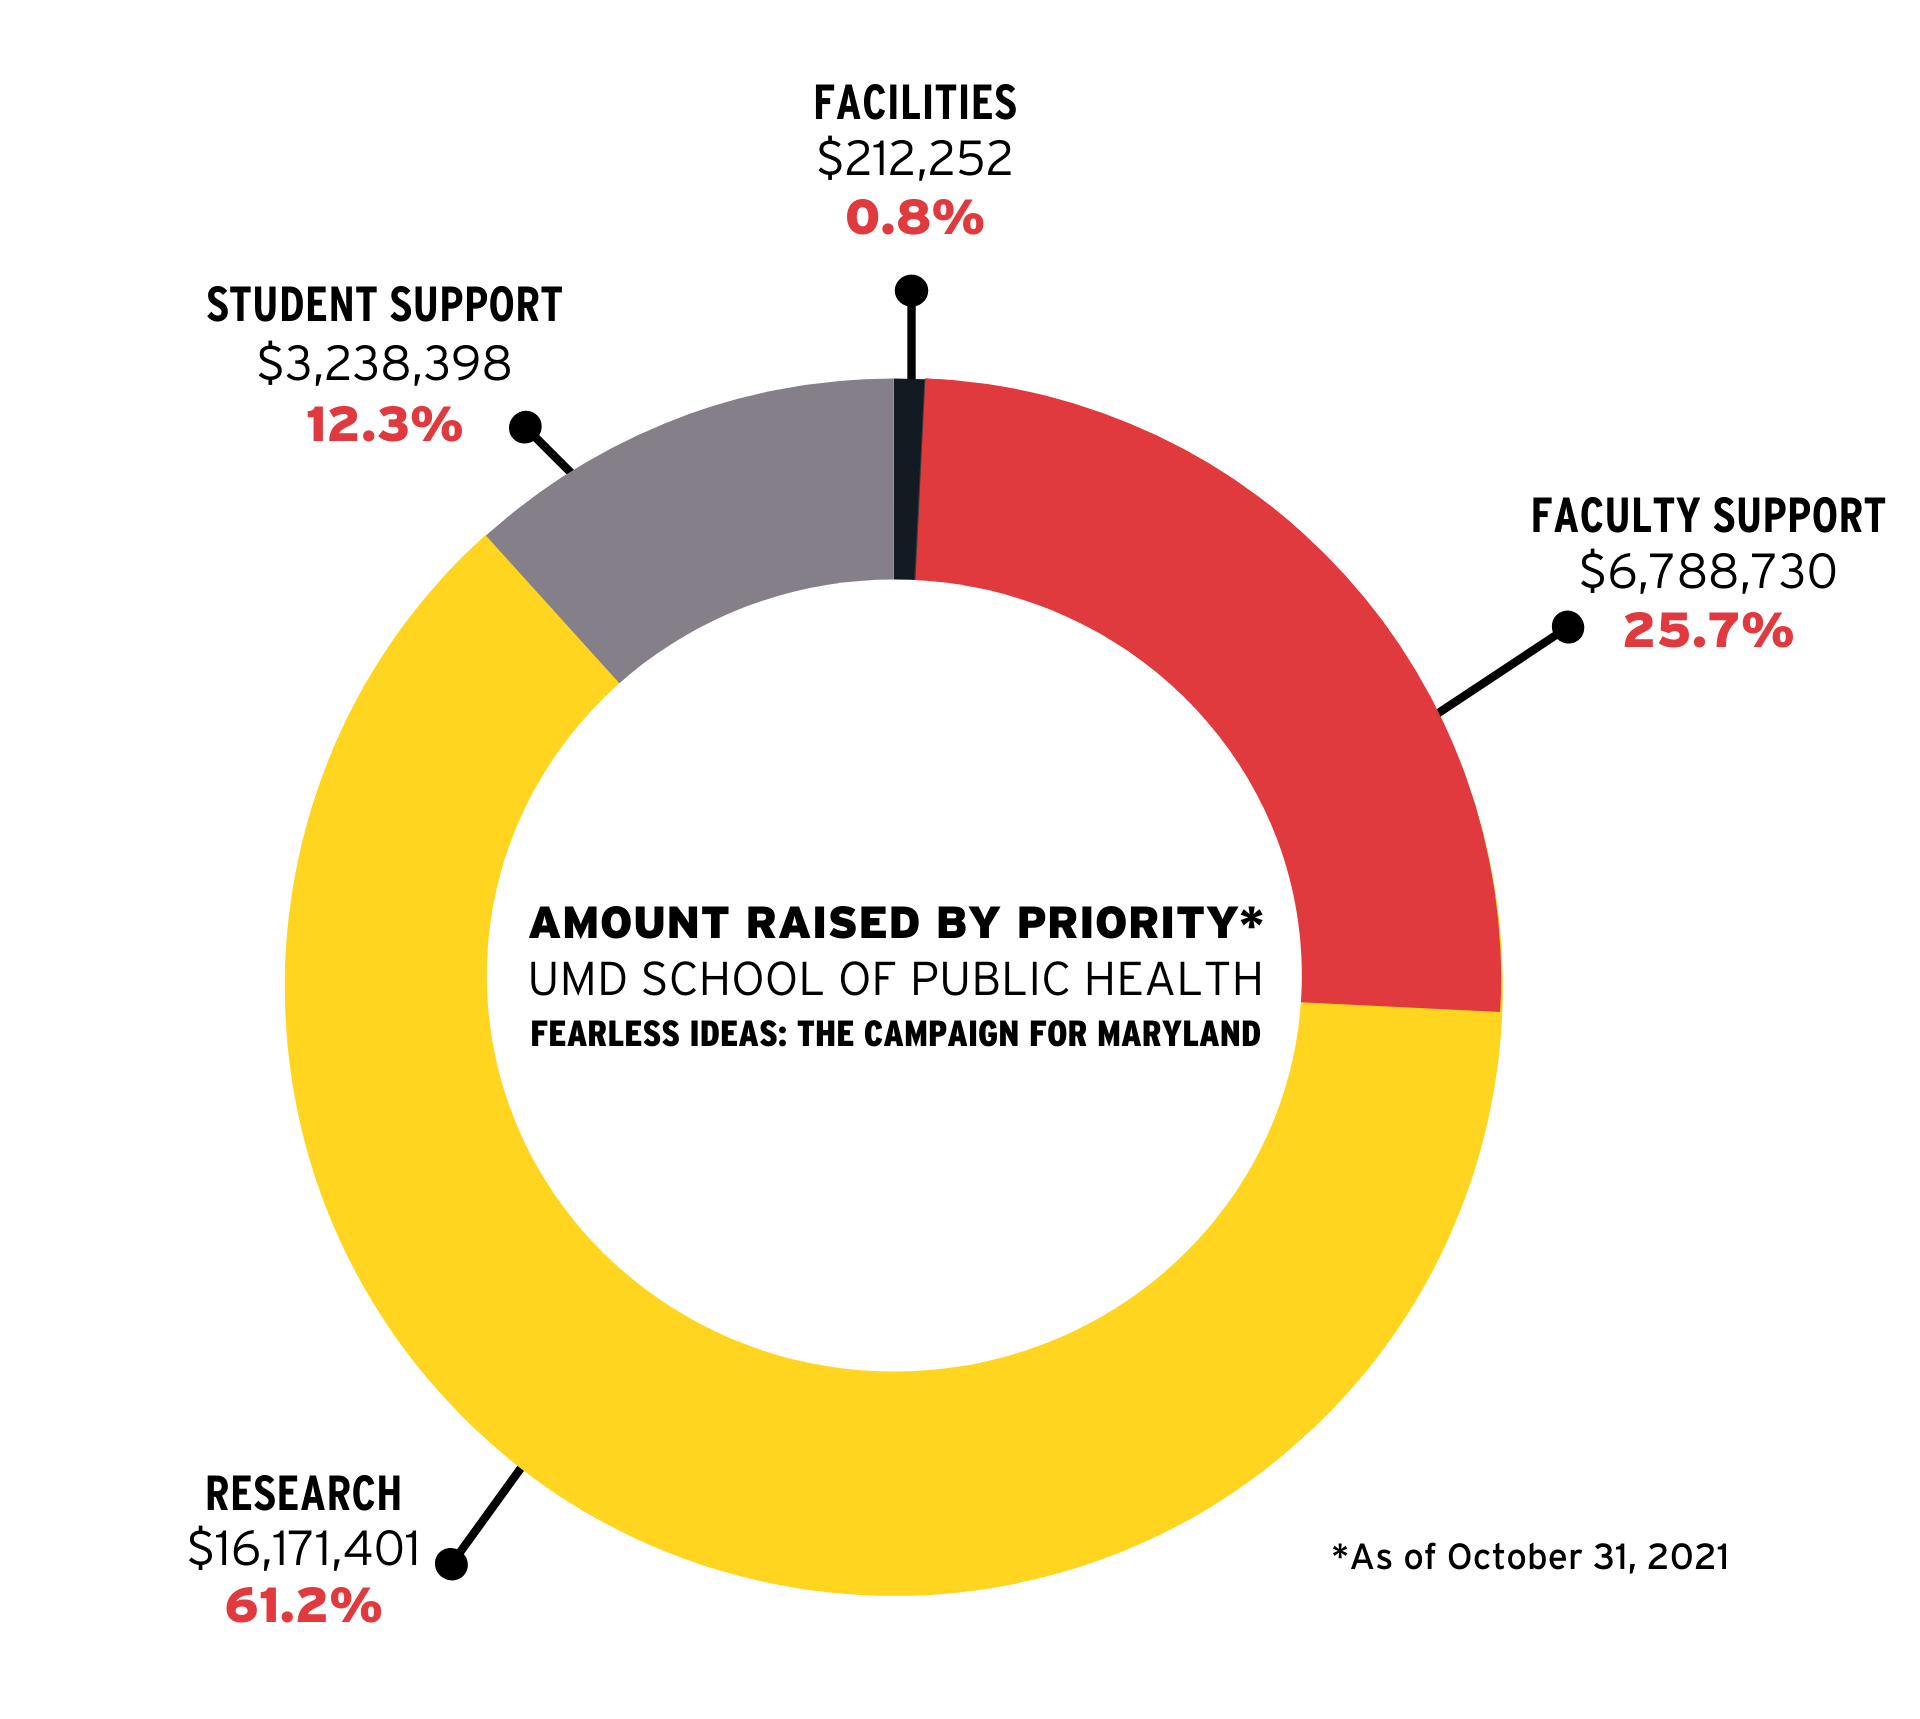 Pie chart showing the amount raised by the UMD School of Public Health during Fearless Ideas: The Campaign for Maryland